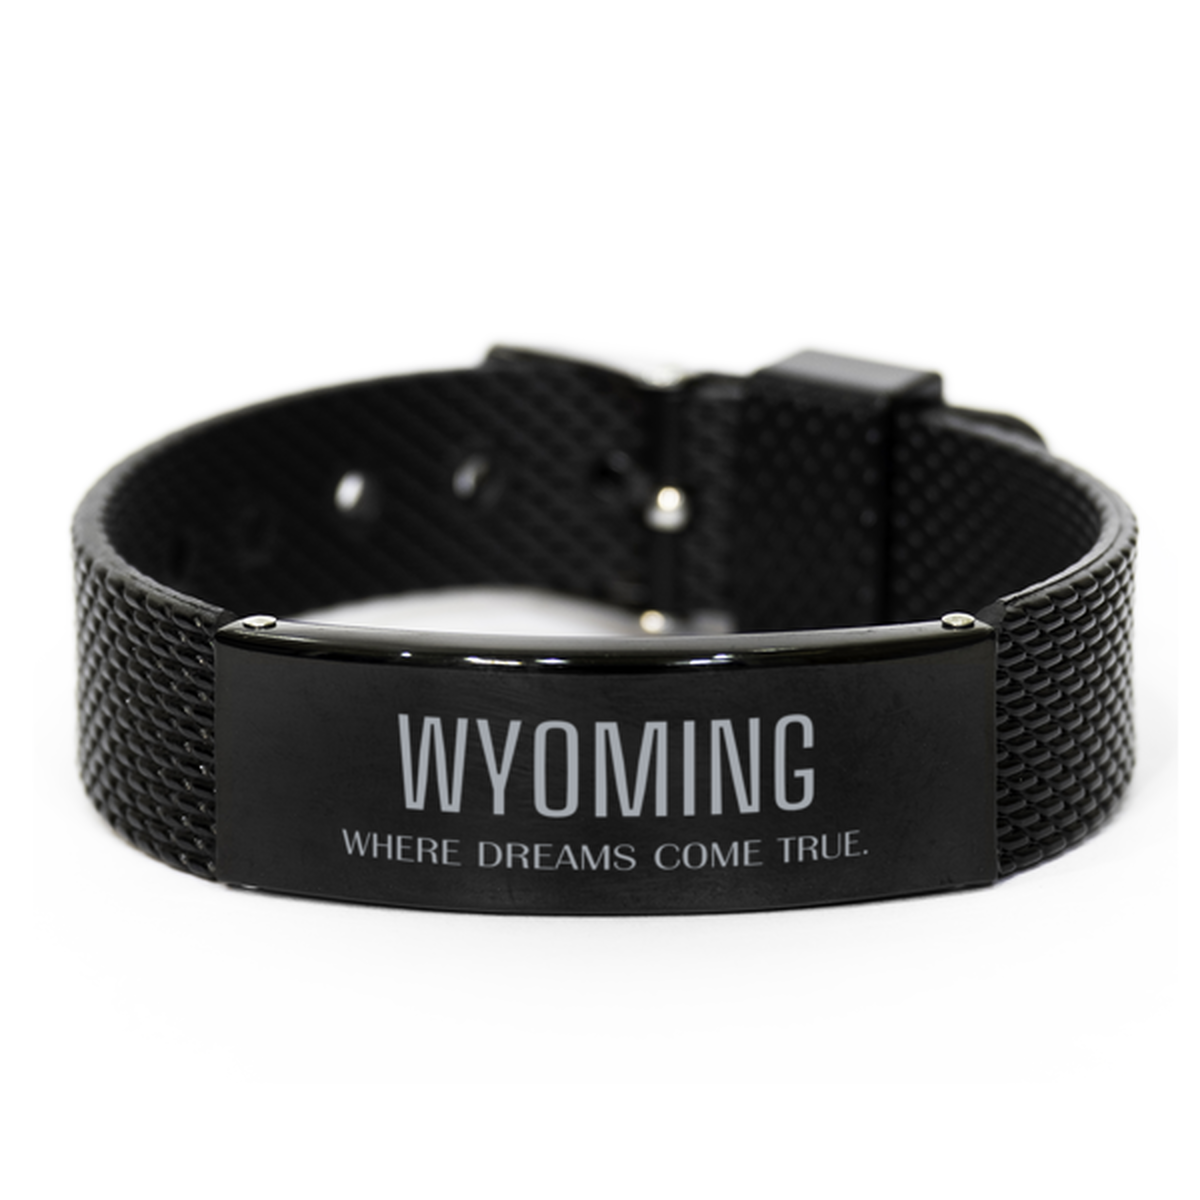 Love Wyoming State Black Shark Mesh Bracelet, Wyoming Where dreams come true, Birthday Inspirational Gifts For Wyoming Men, Women, Friends